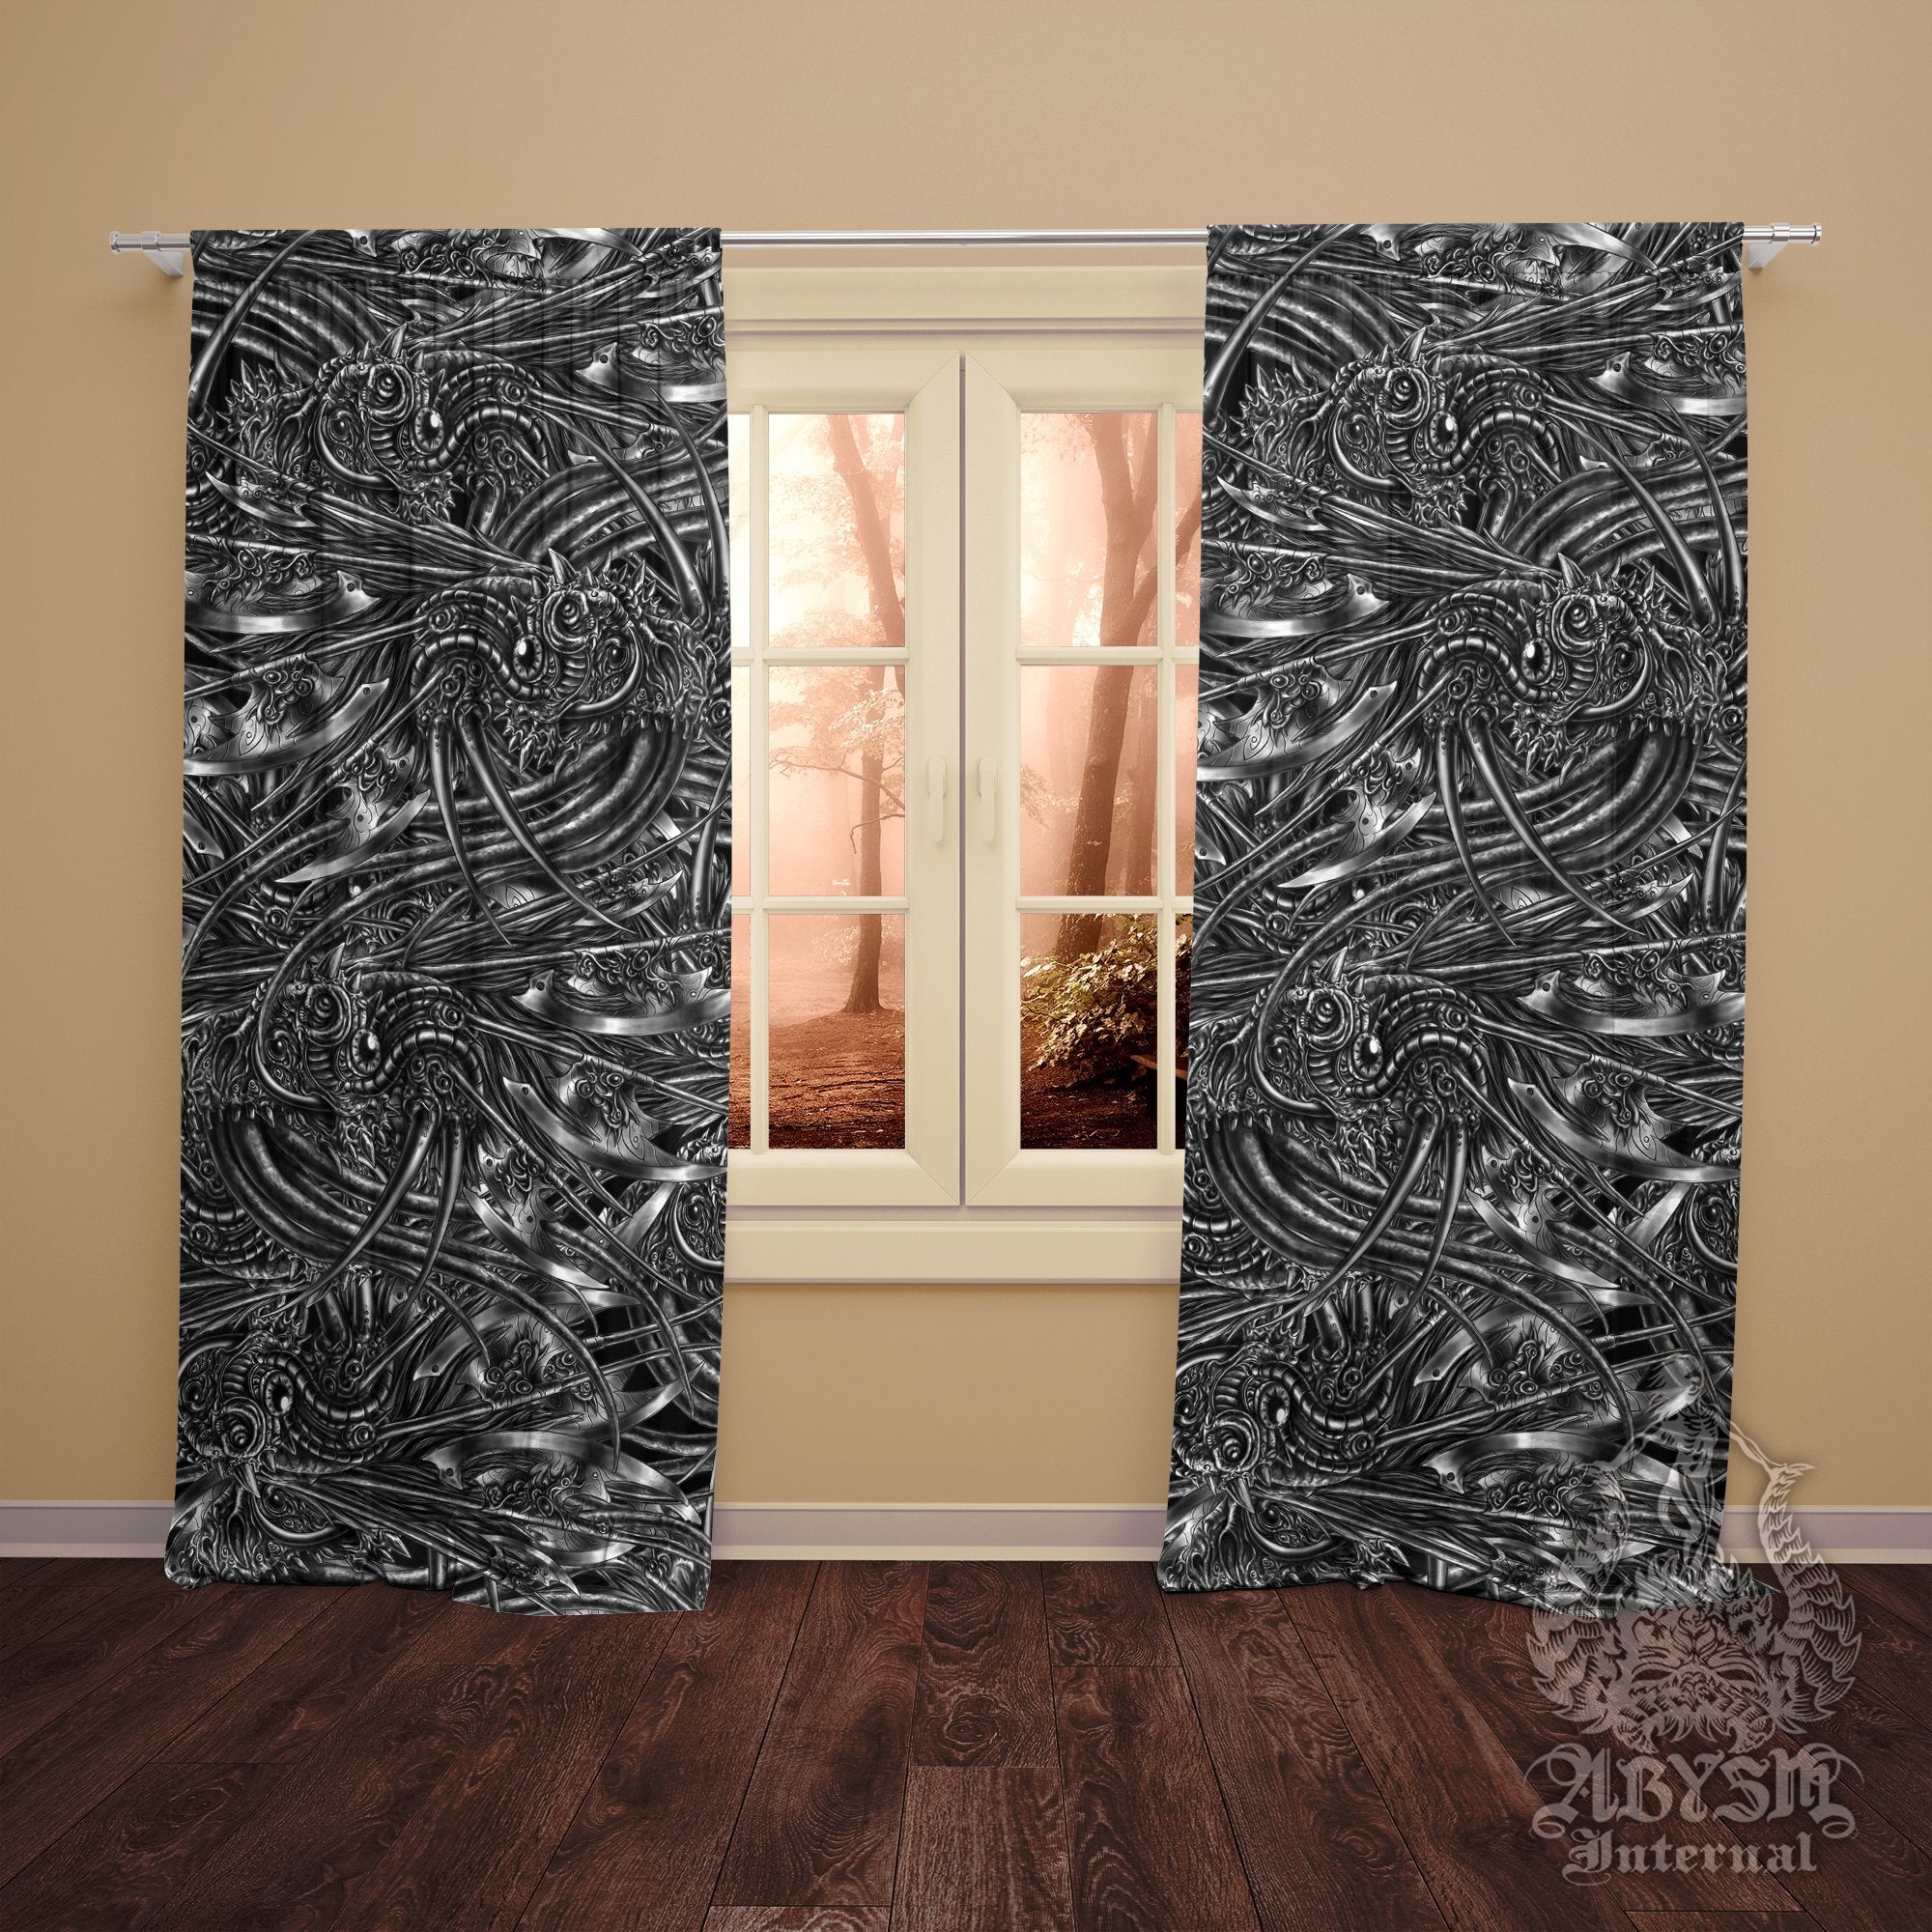 Goth Alien Curtains, 50x84' Printed Window Panels, Fantasy Game Room Decor, Gothic Abstract Art Print - Abysm Internal